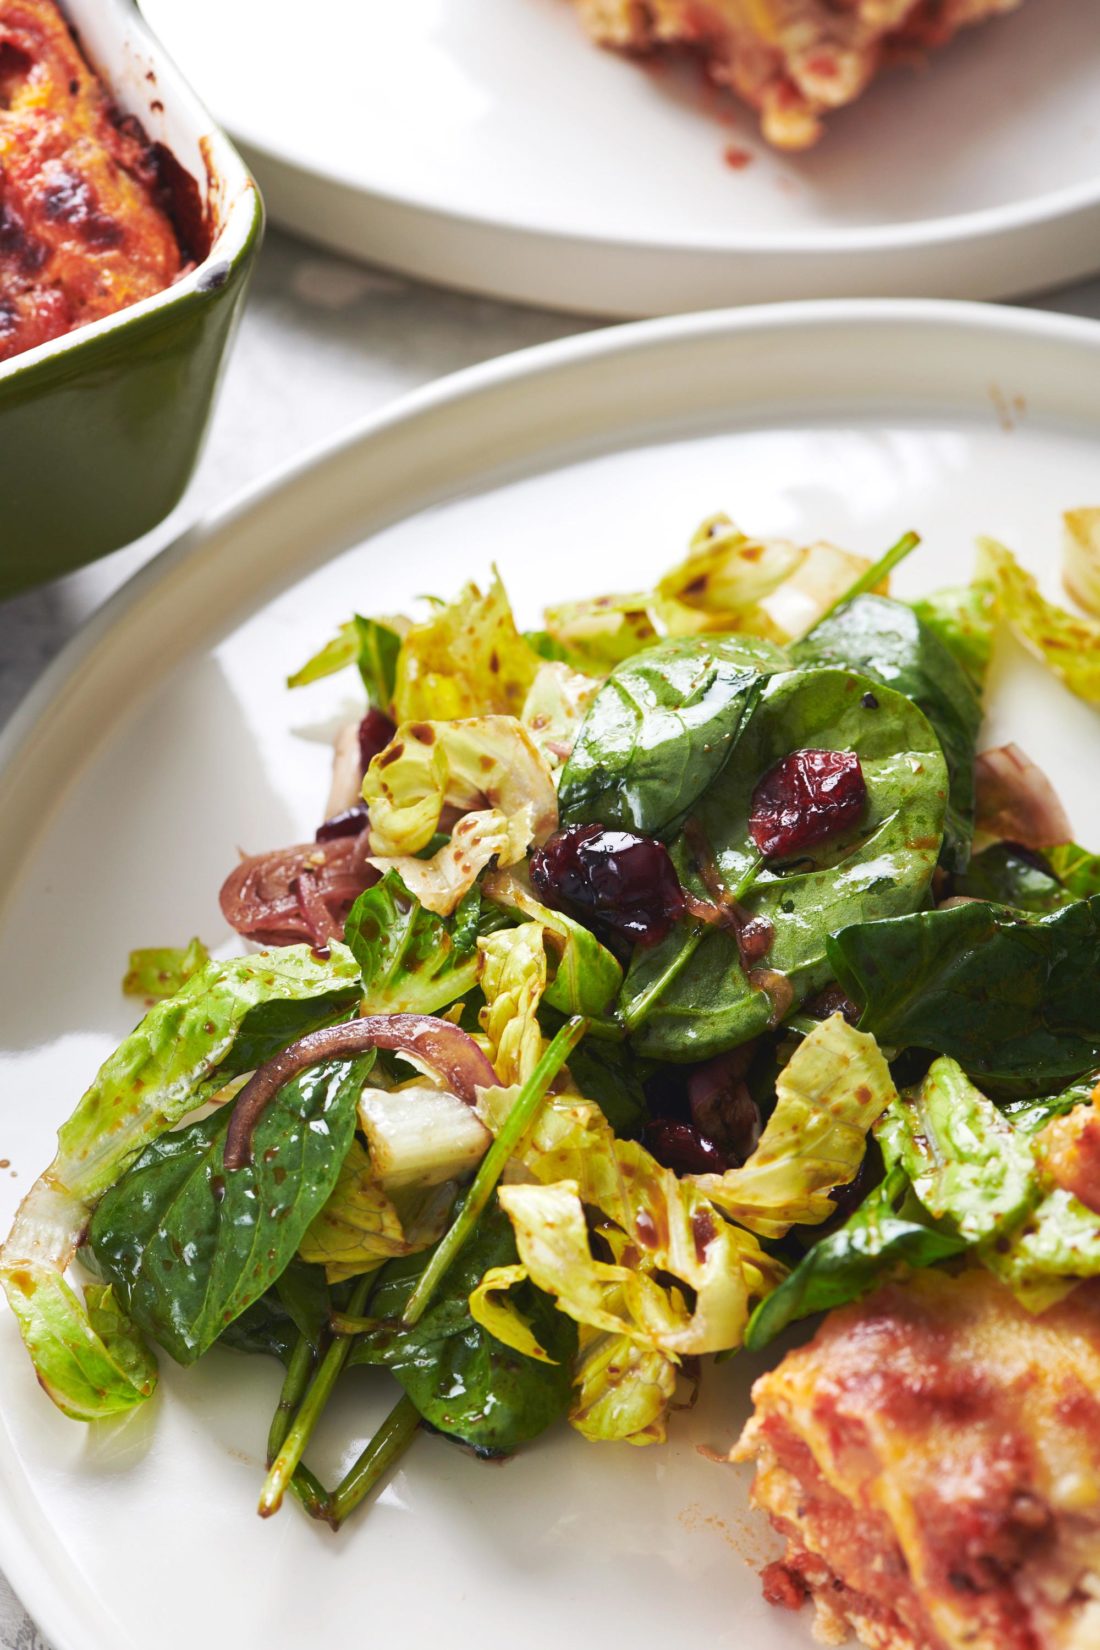 Autumn Salad with Cranberries and Goat Cheese